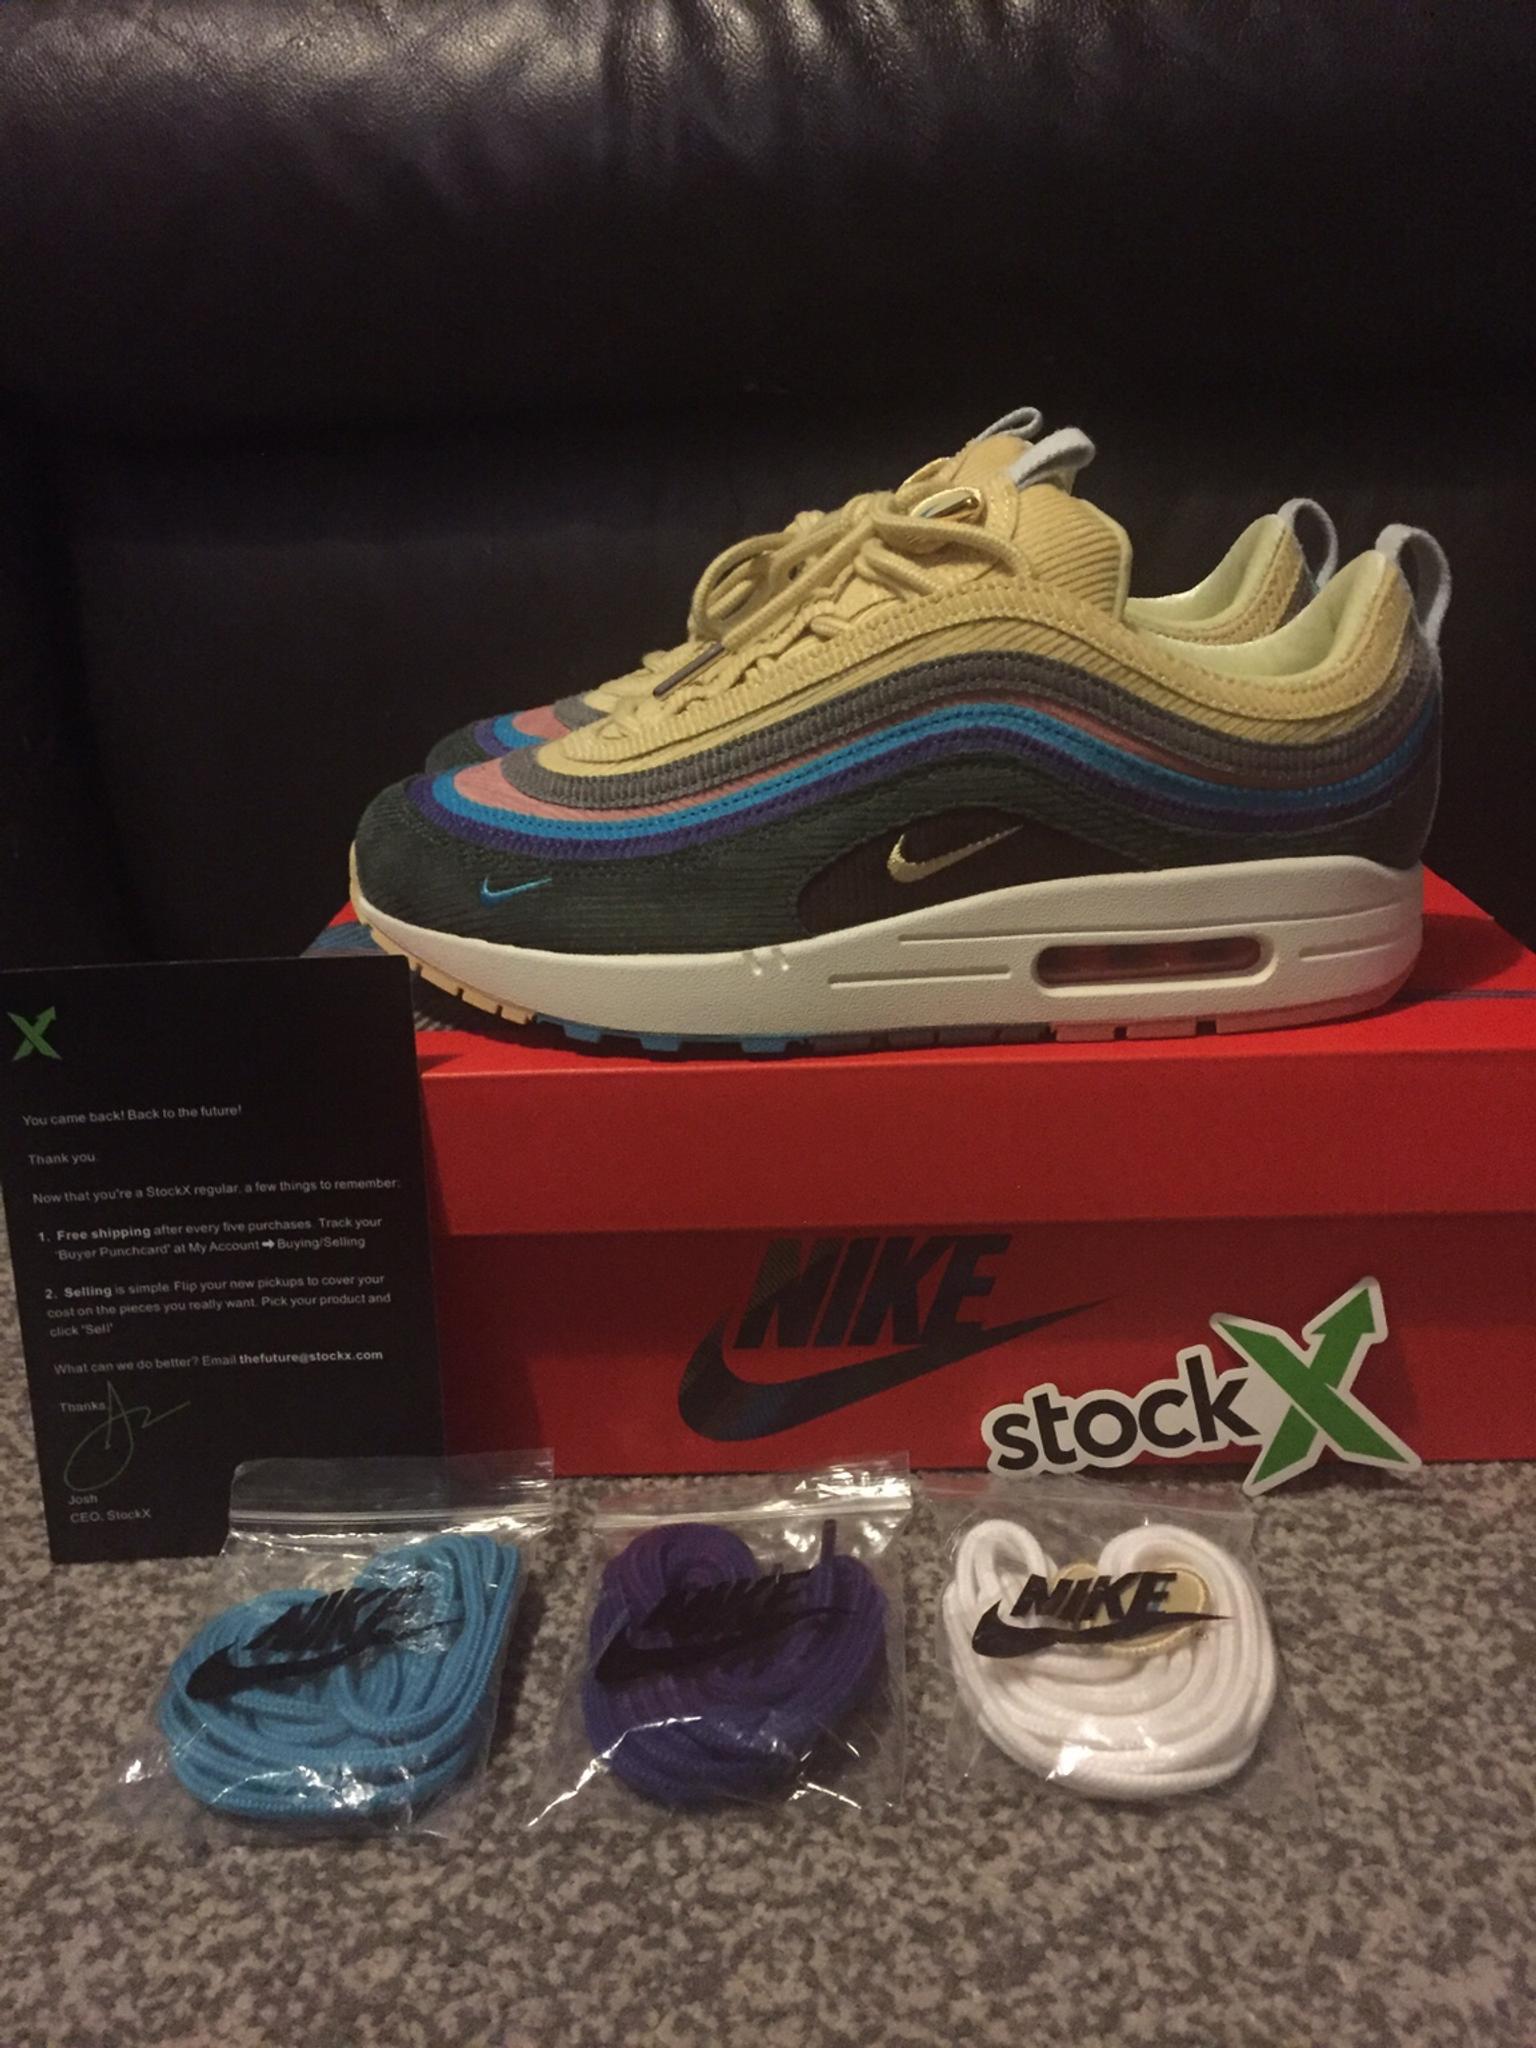 wotherspoon stockx